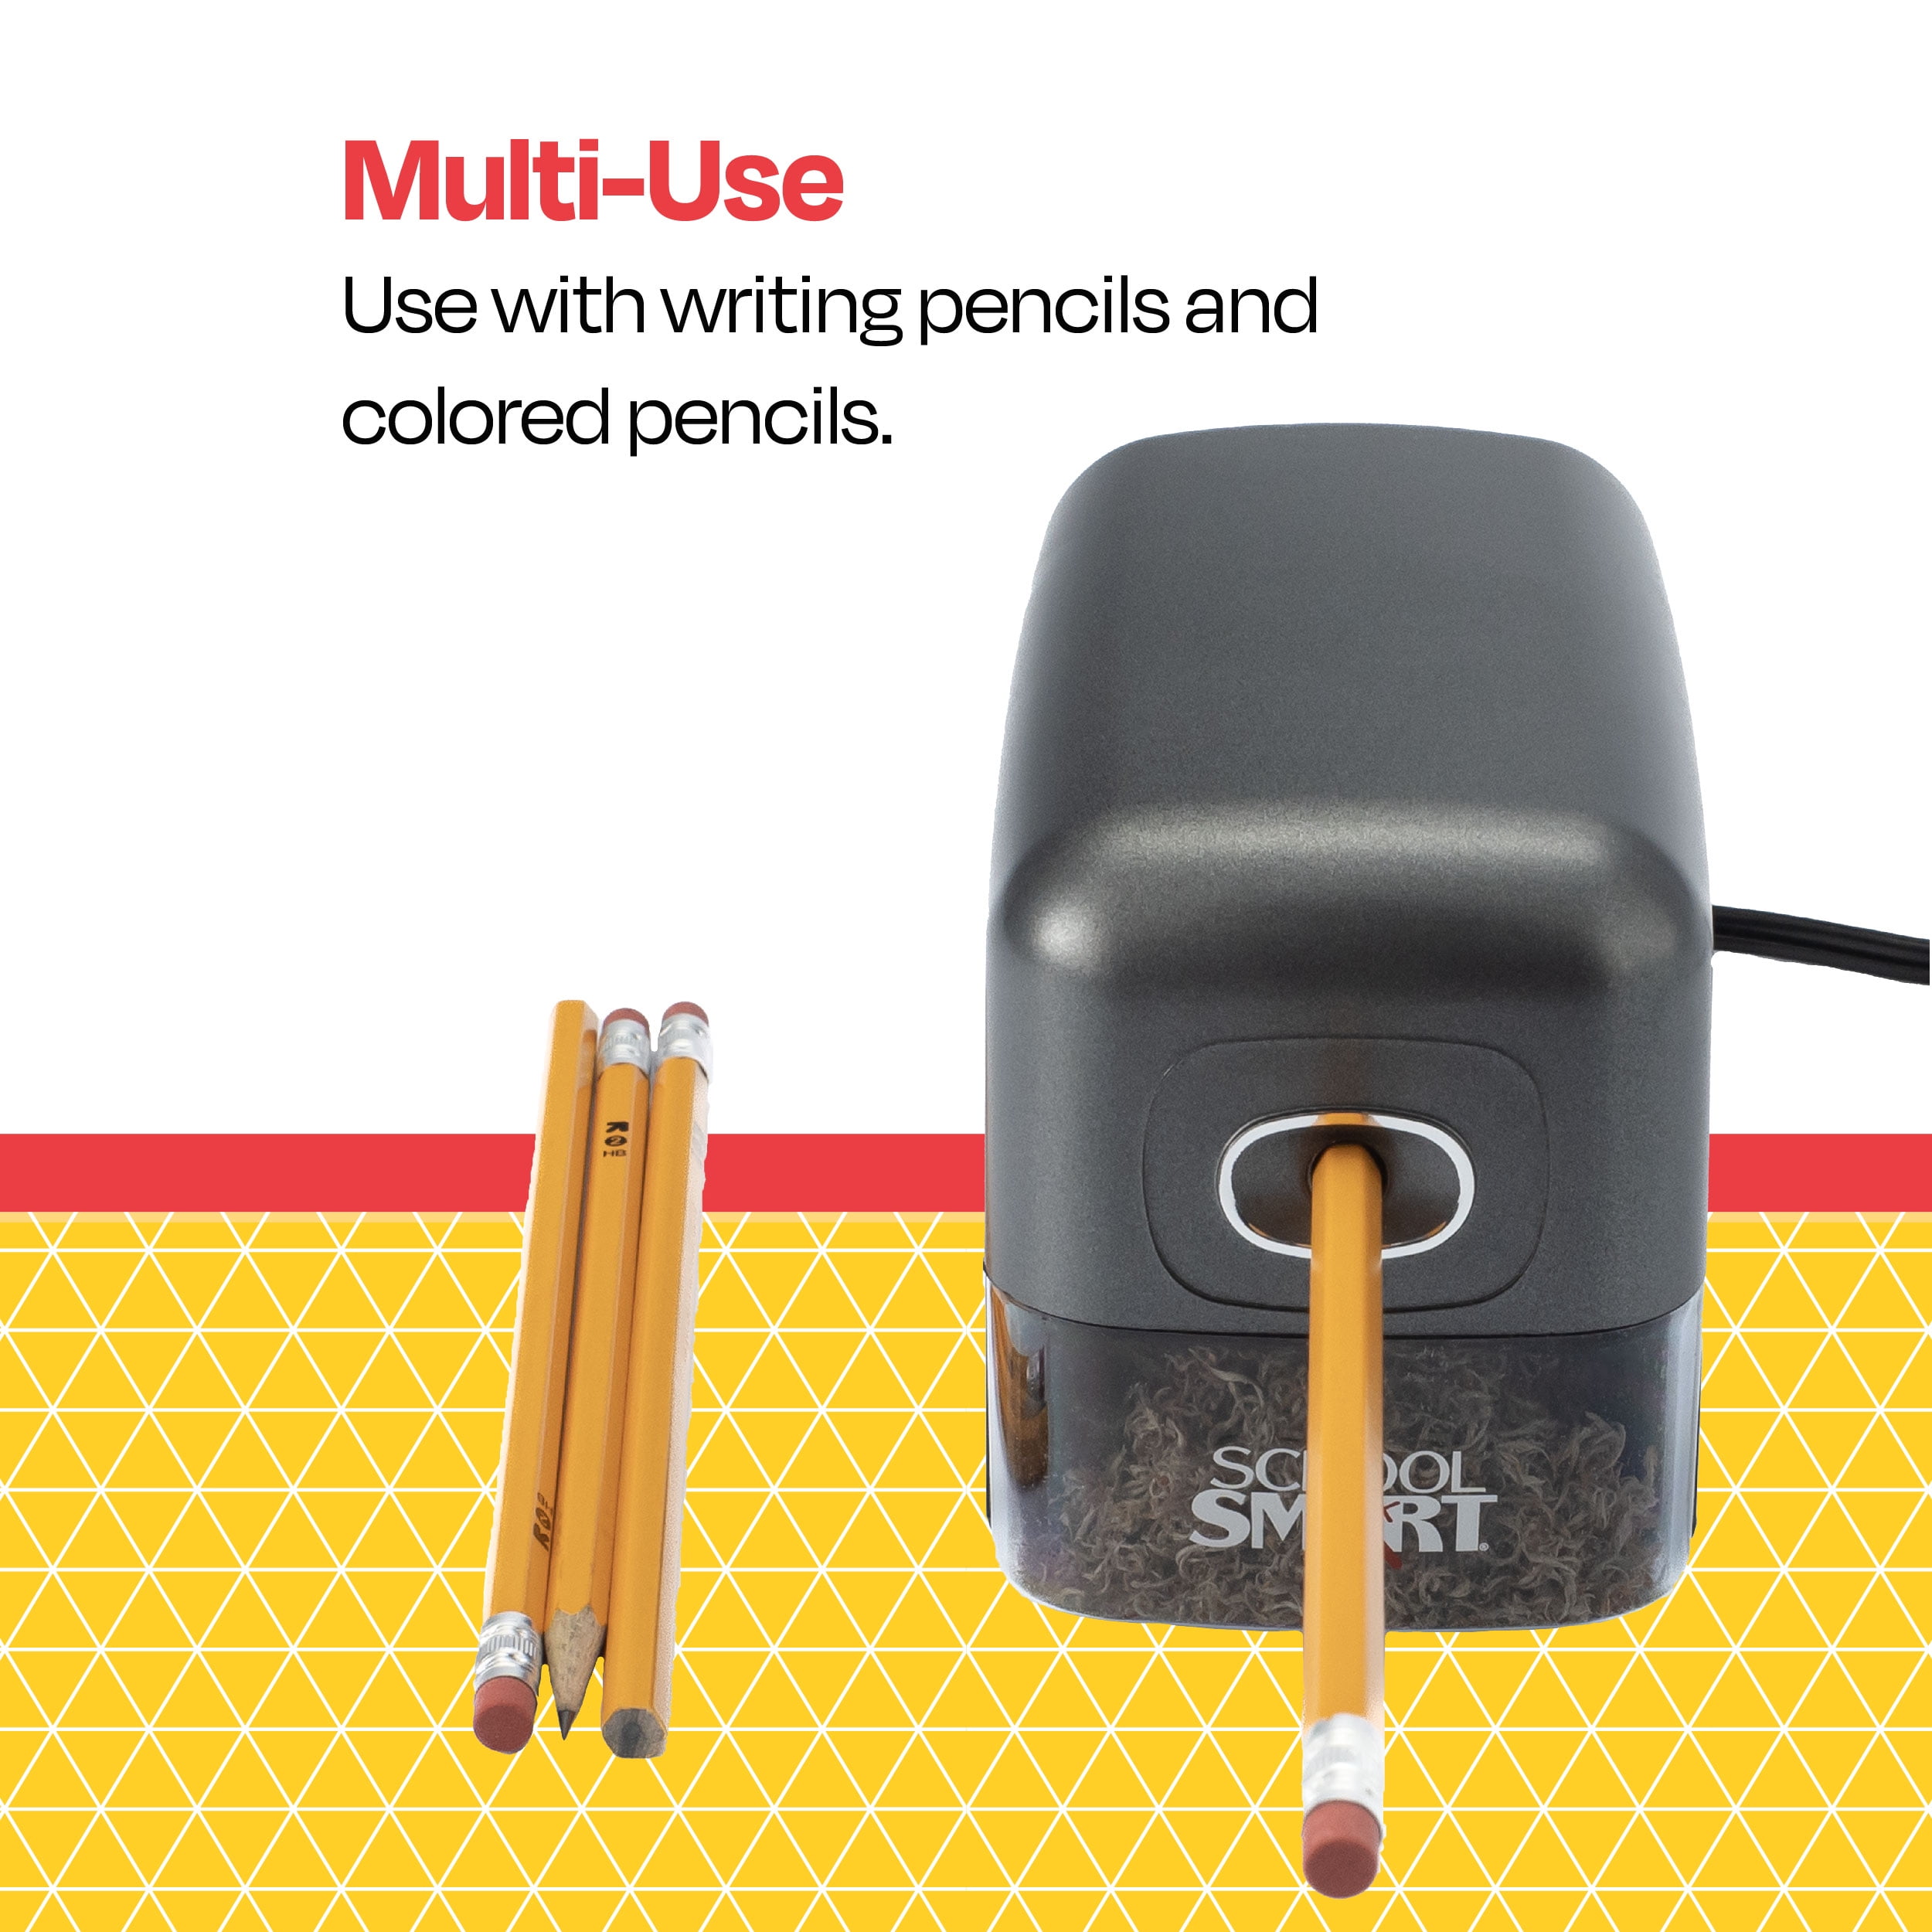 MAKING A MARK: Two new sharpeners - from Prismacolor and Panasonic